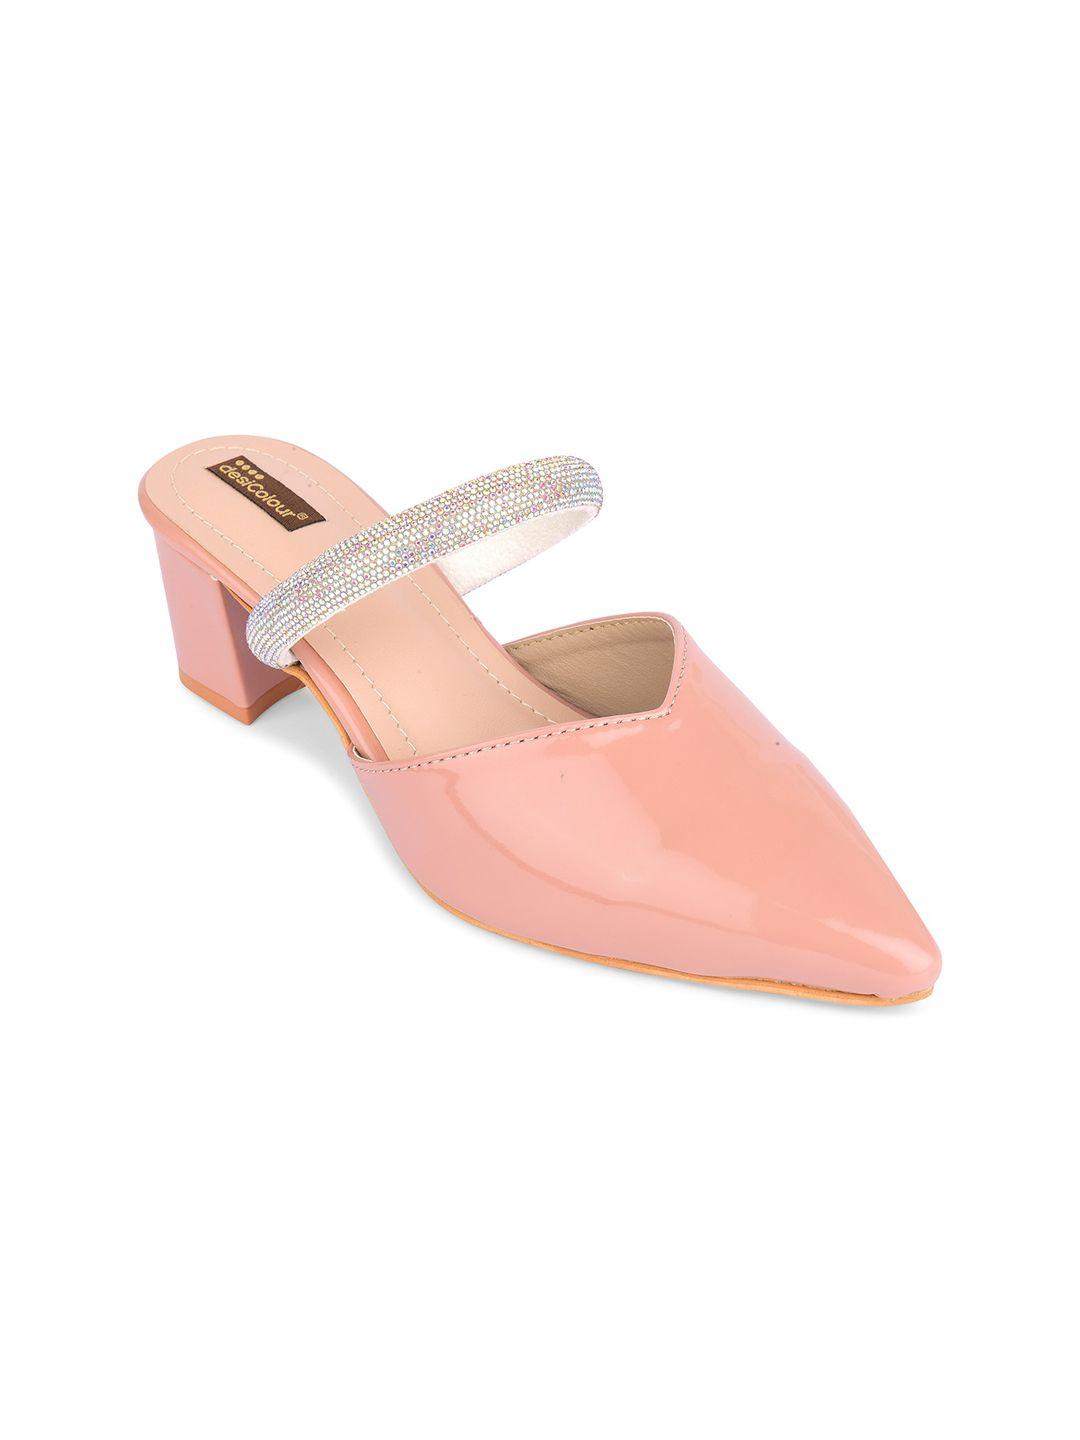 desi colour peach-coloured party block mules with bows